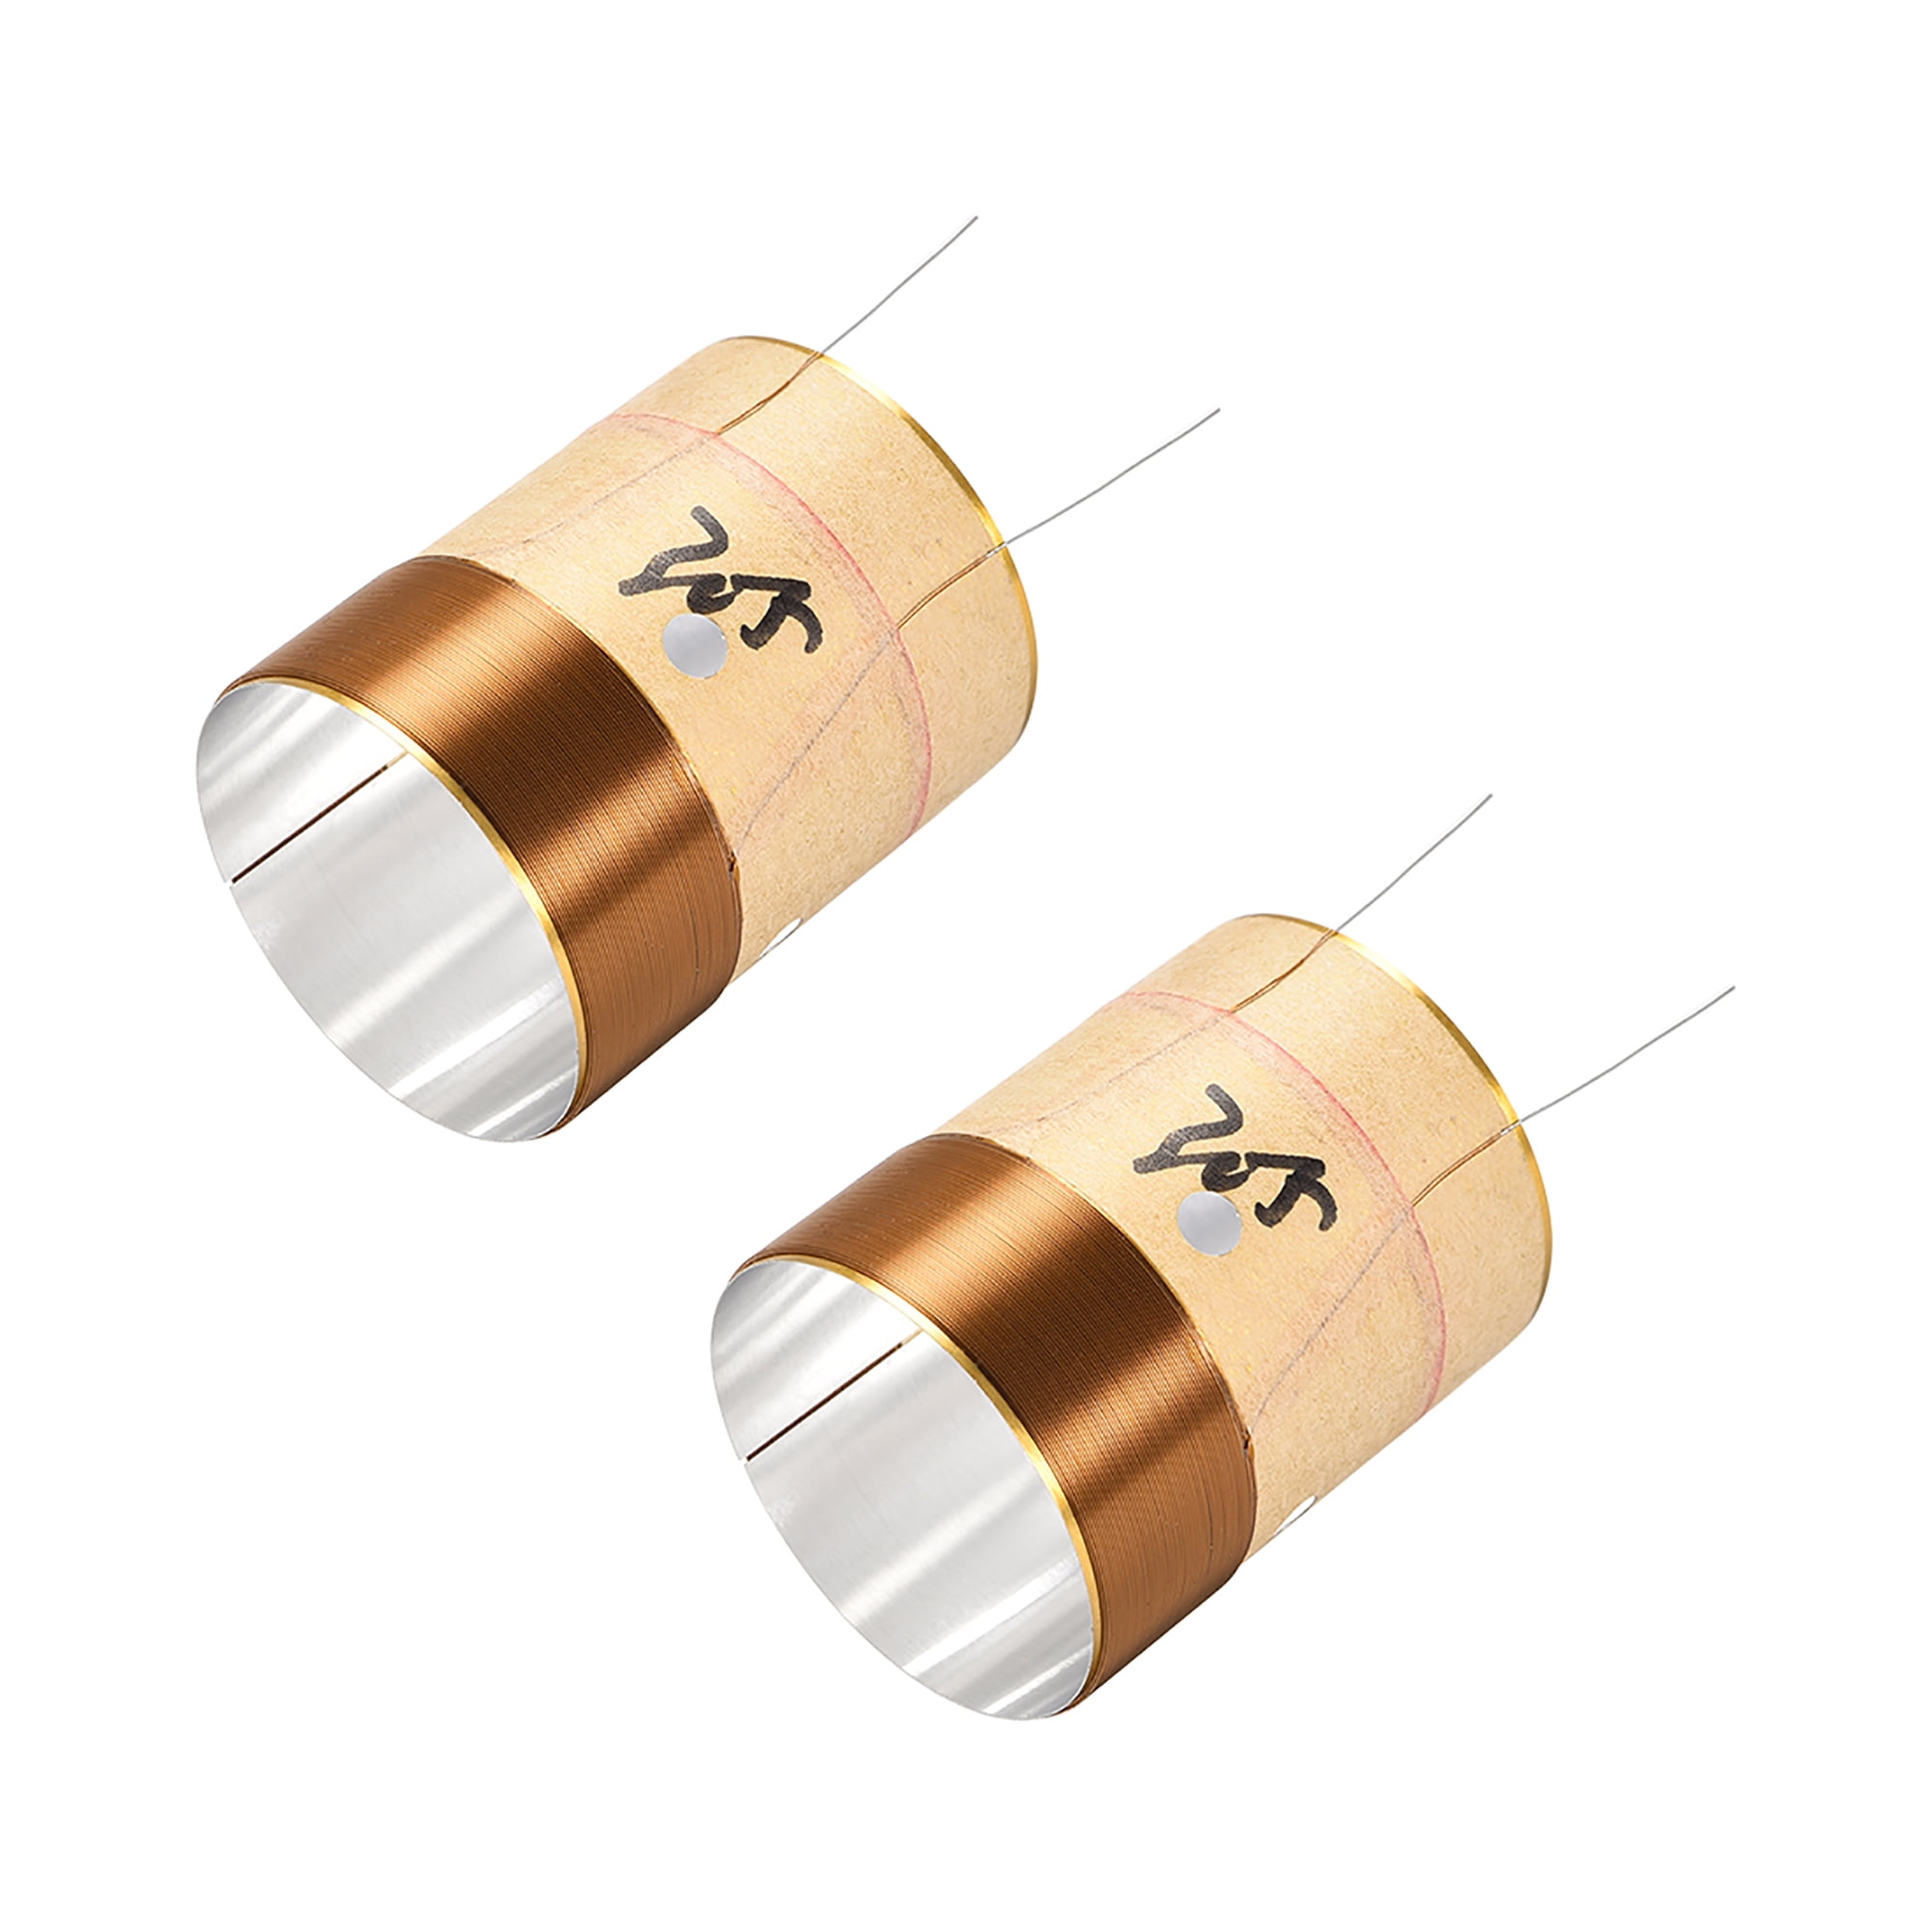 uxcell 2pcs 35.5mm 1.5 Woofer Voice Coil 2 Layers Round Copper Wire Bass Speaker Audio Replacement 